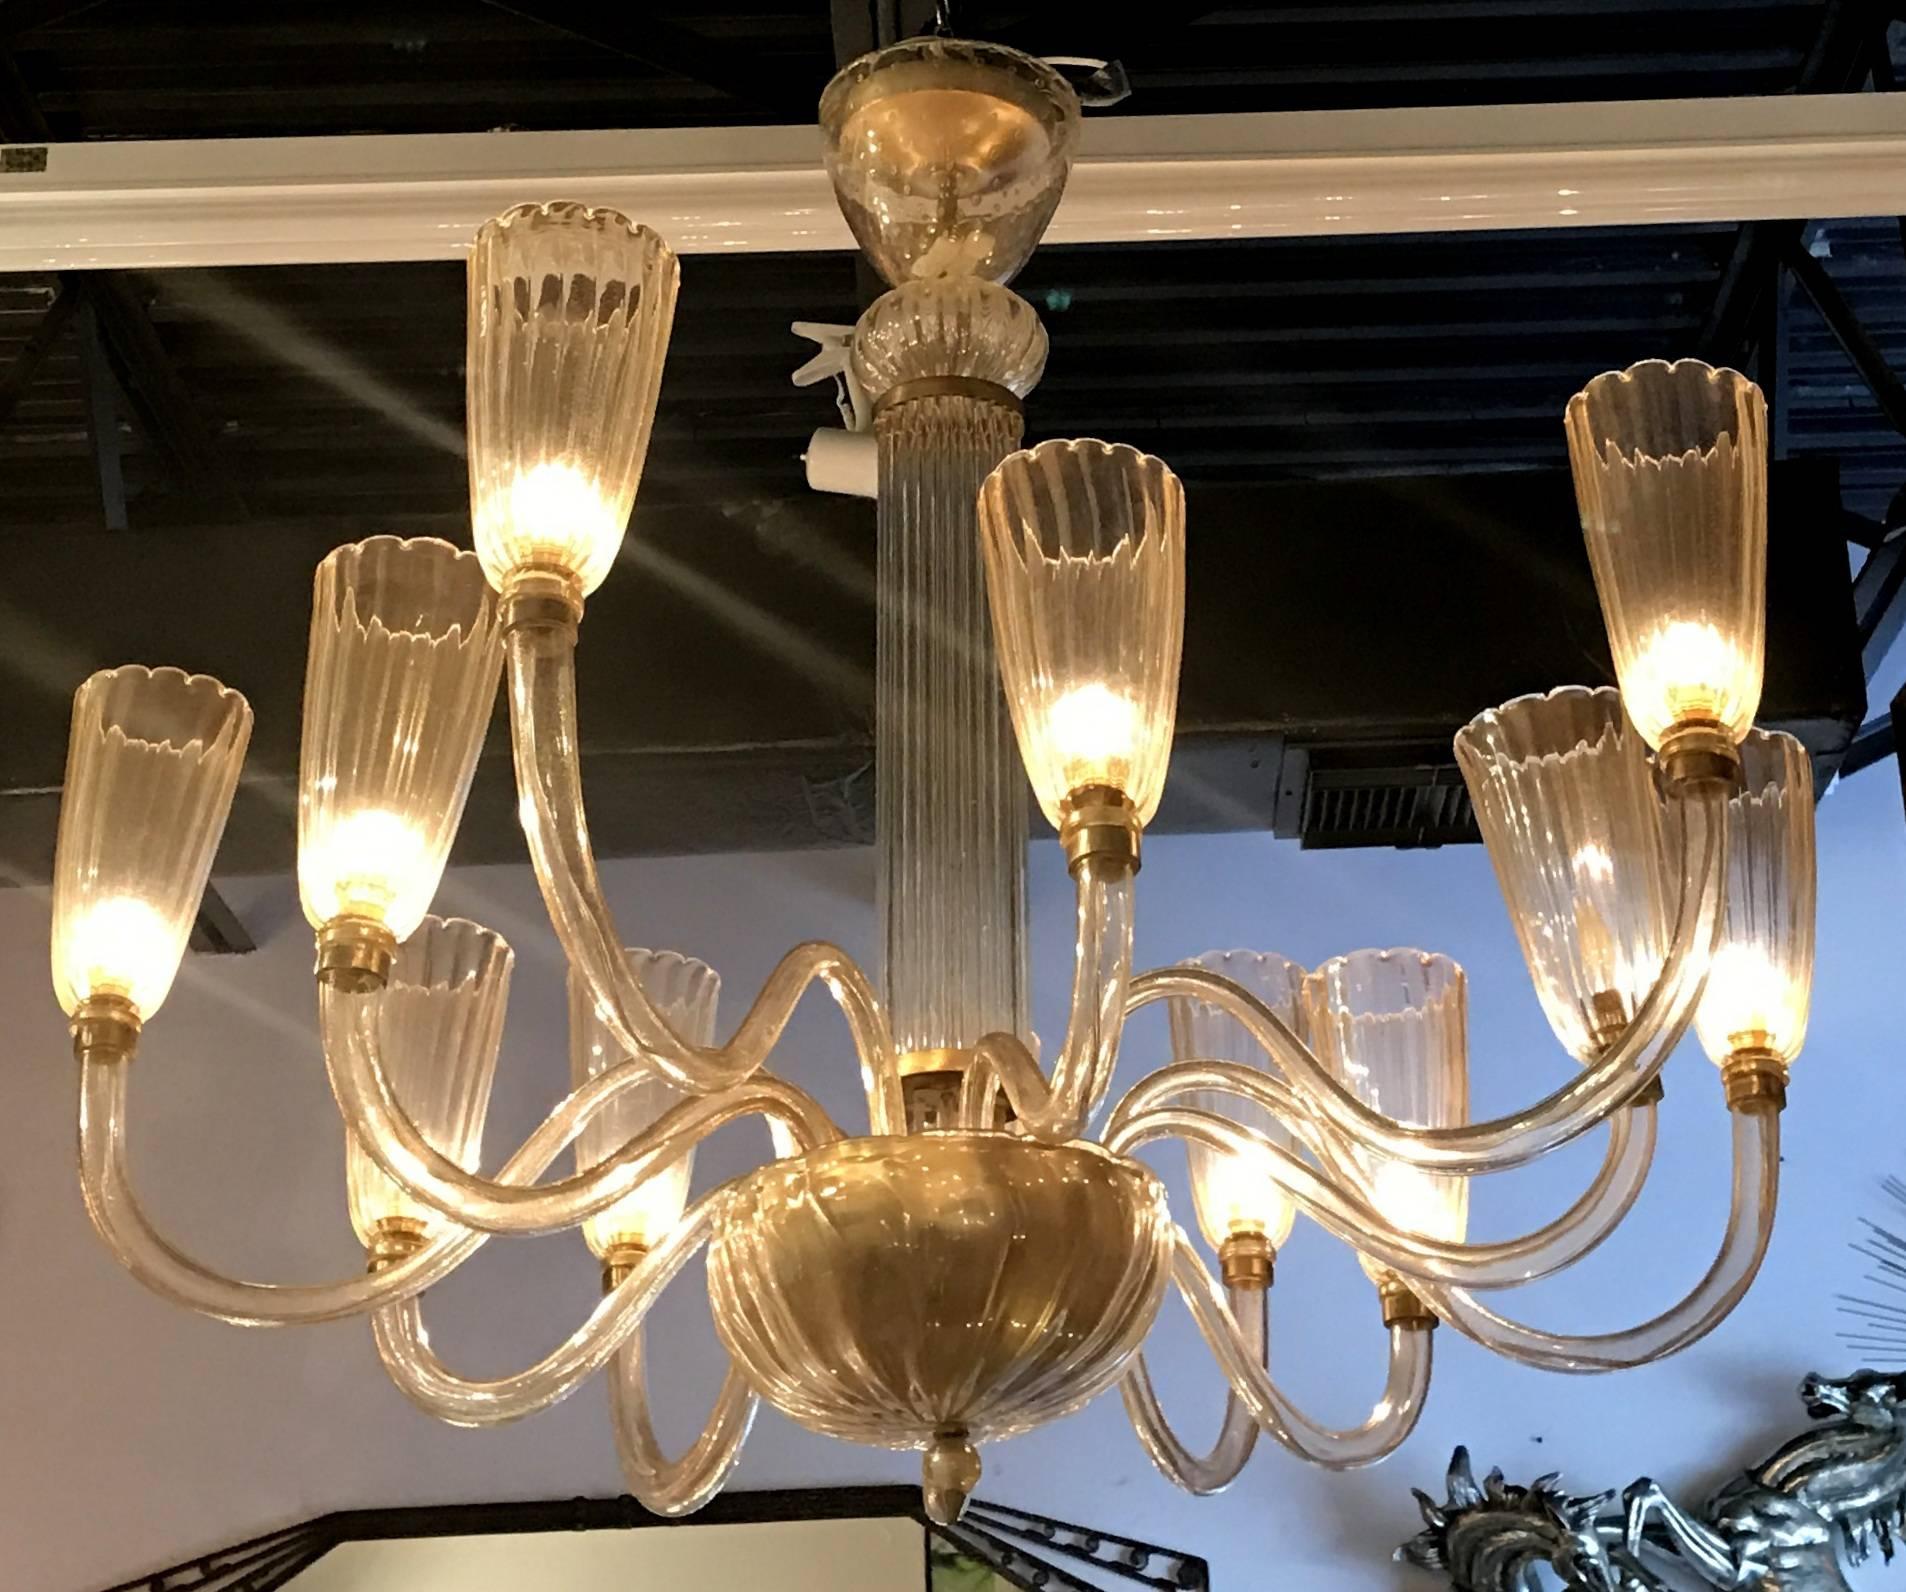 Spectacular in size and quality! This Murano glass with gold inclusion creates a beautiful warm light when illuminated and is incredibly elegant to behold whether lit or not.